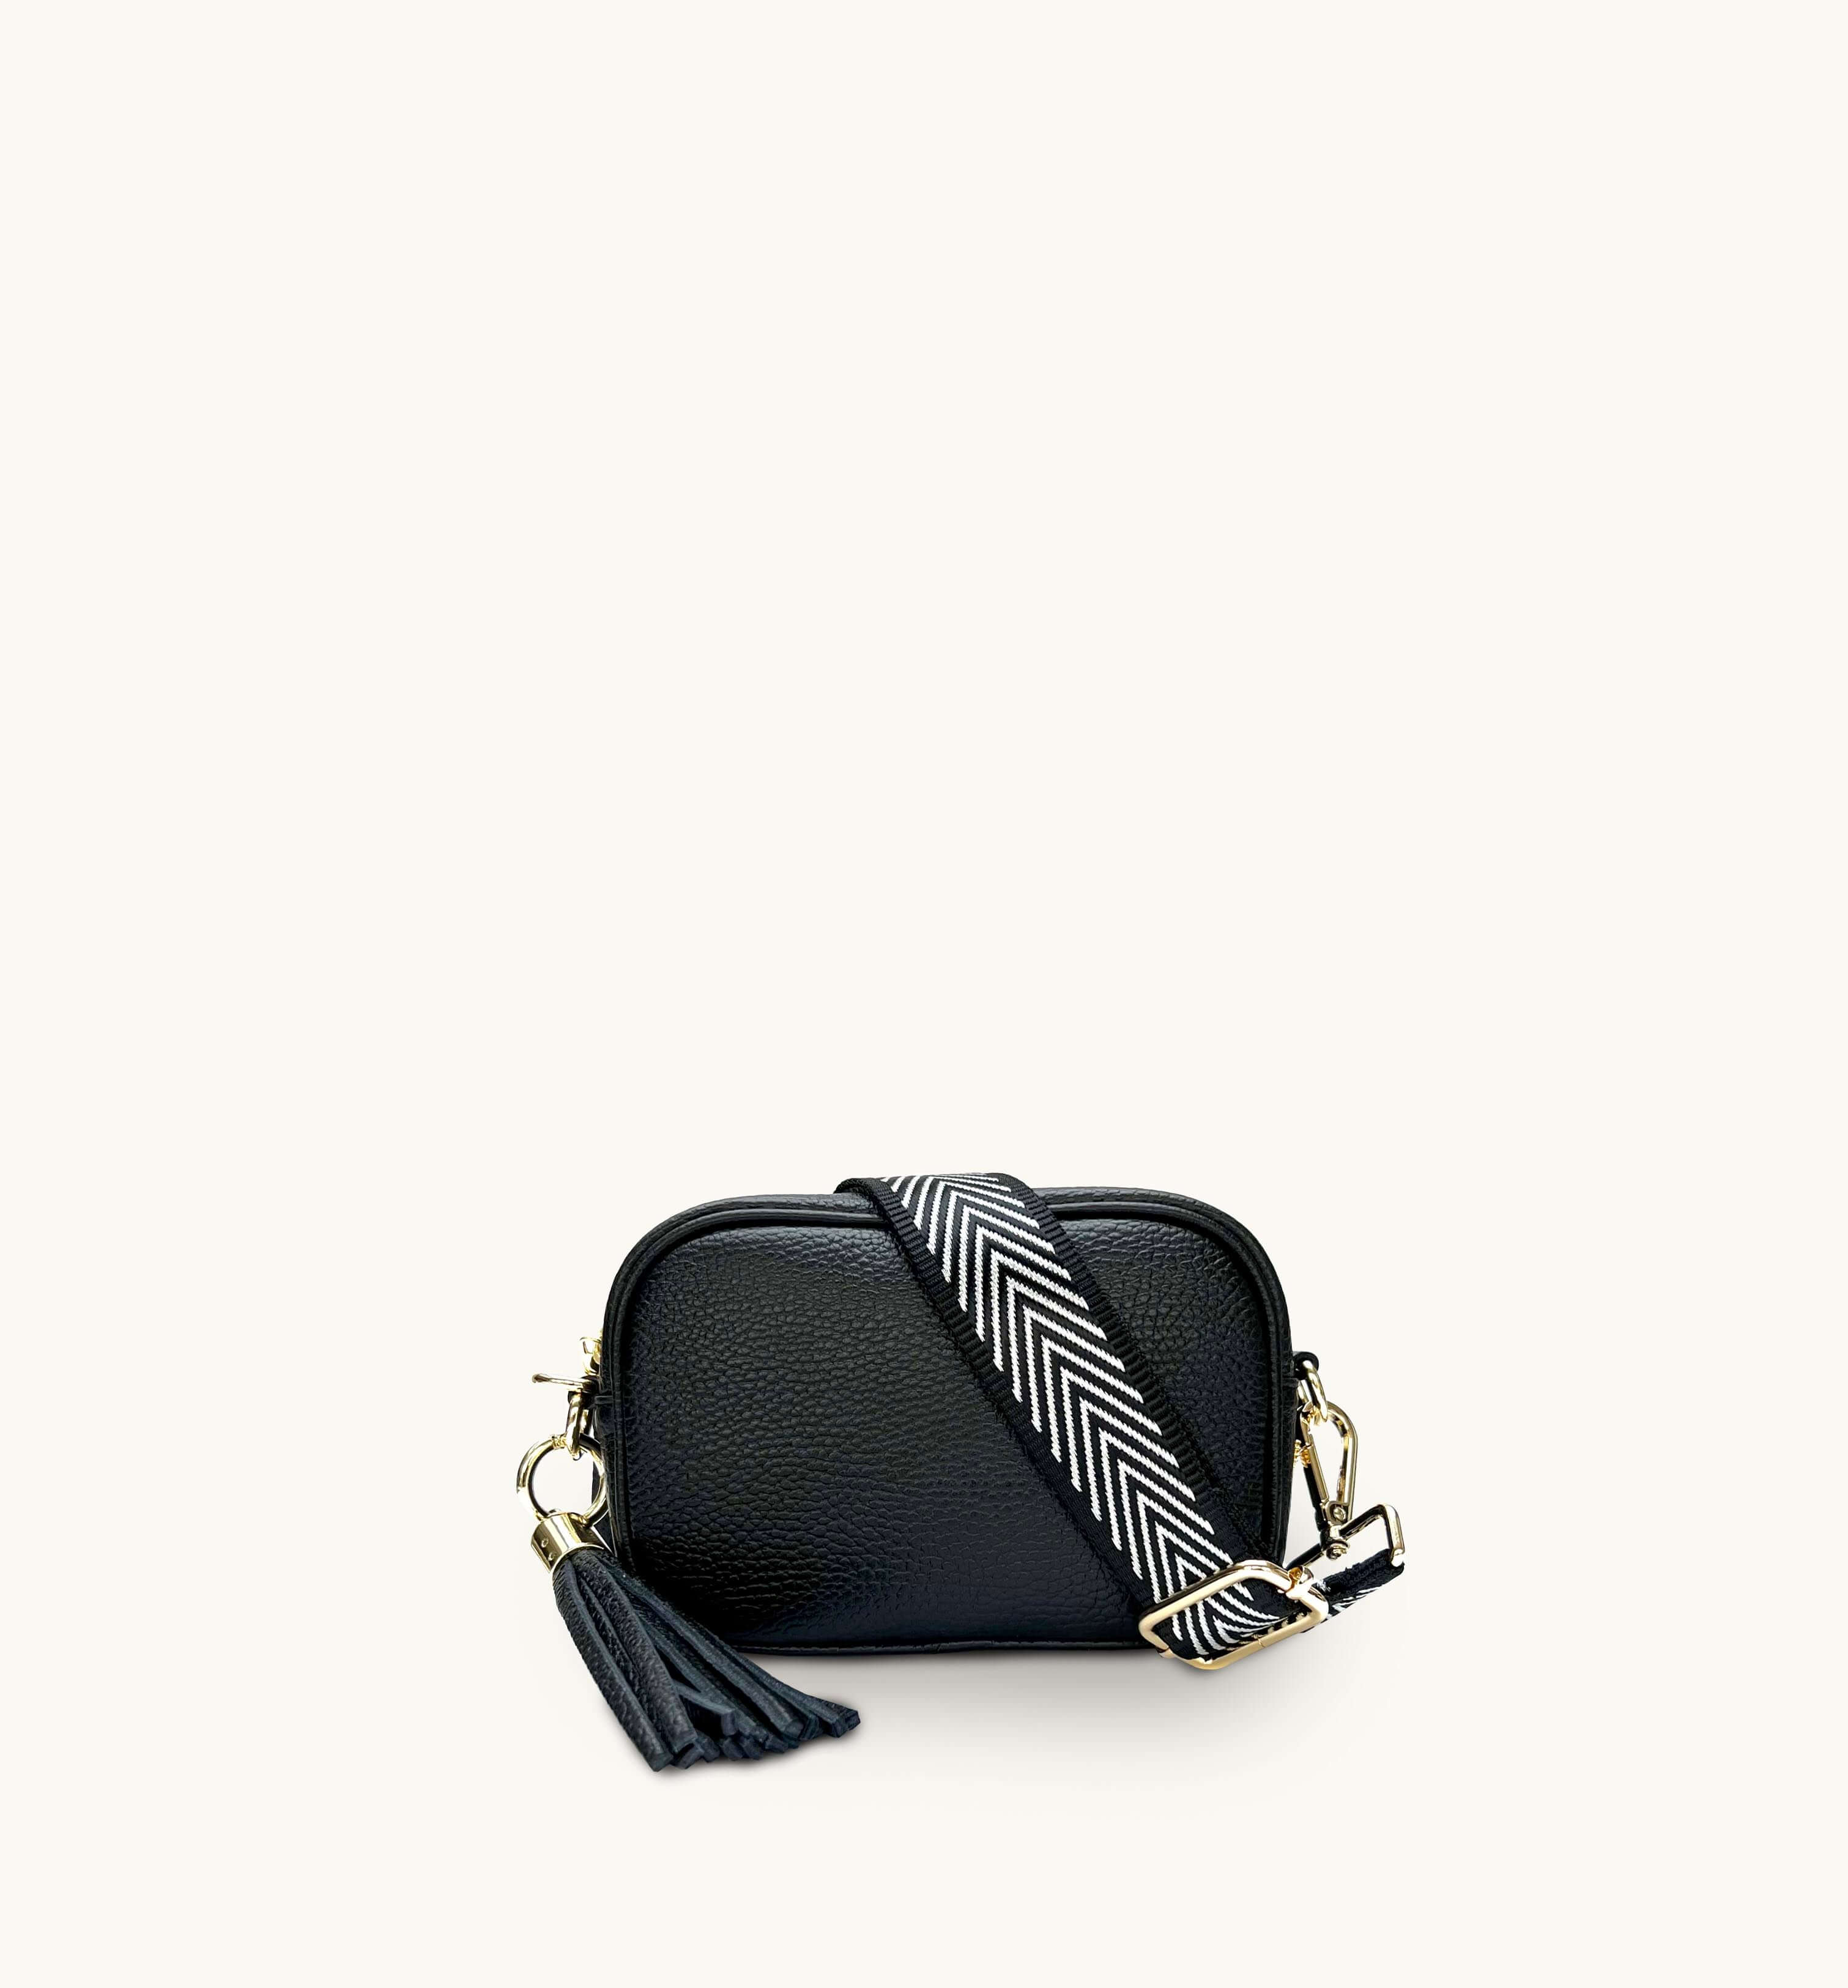 Apatchy Mini Black Leather Phone Bag With Black & Silver Chevron Strap